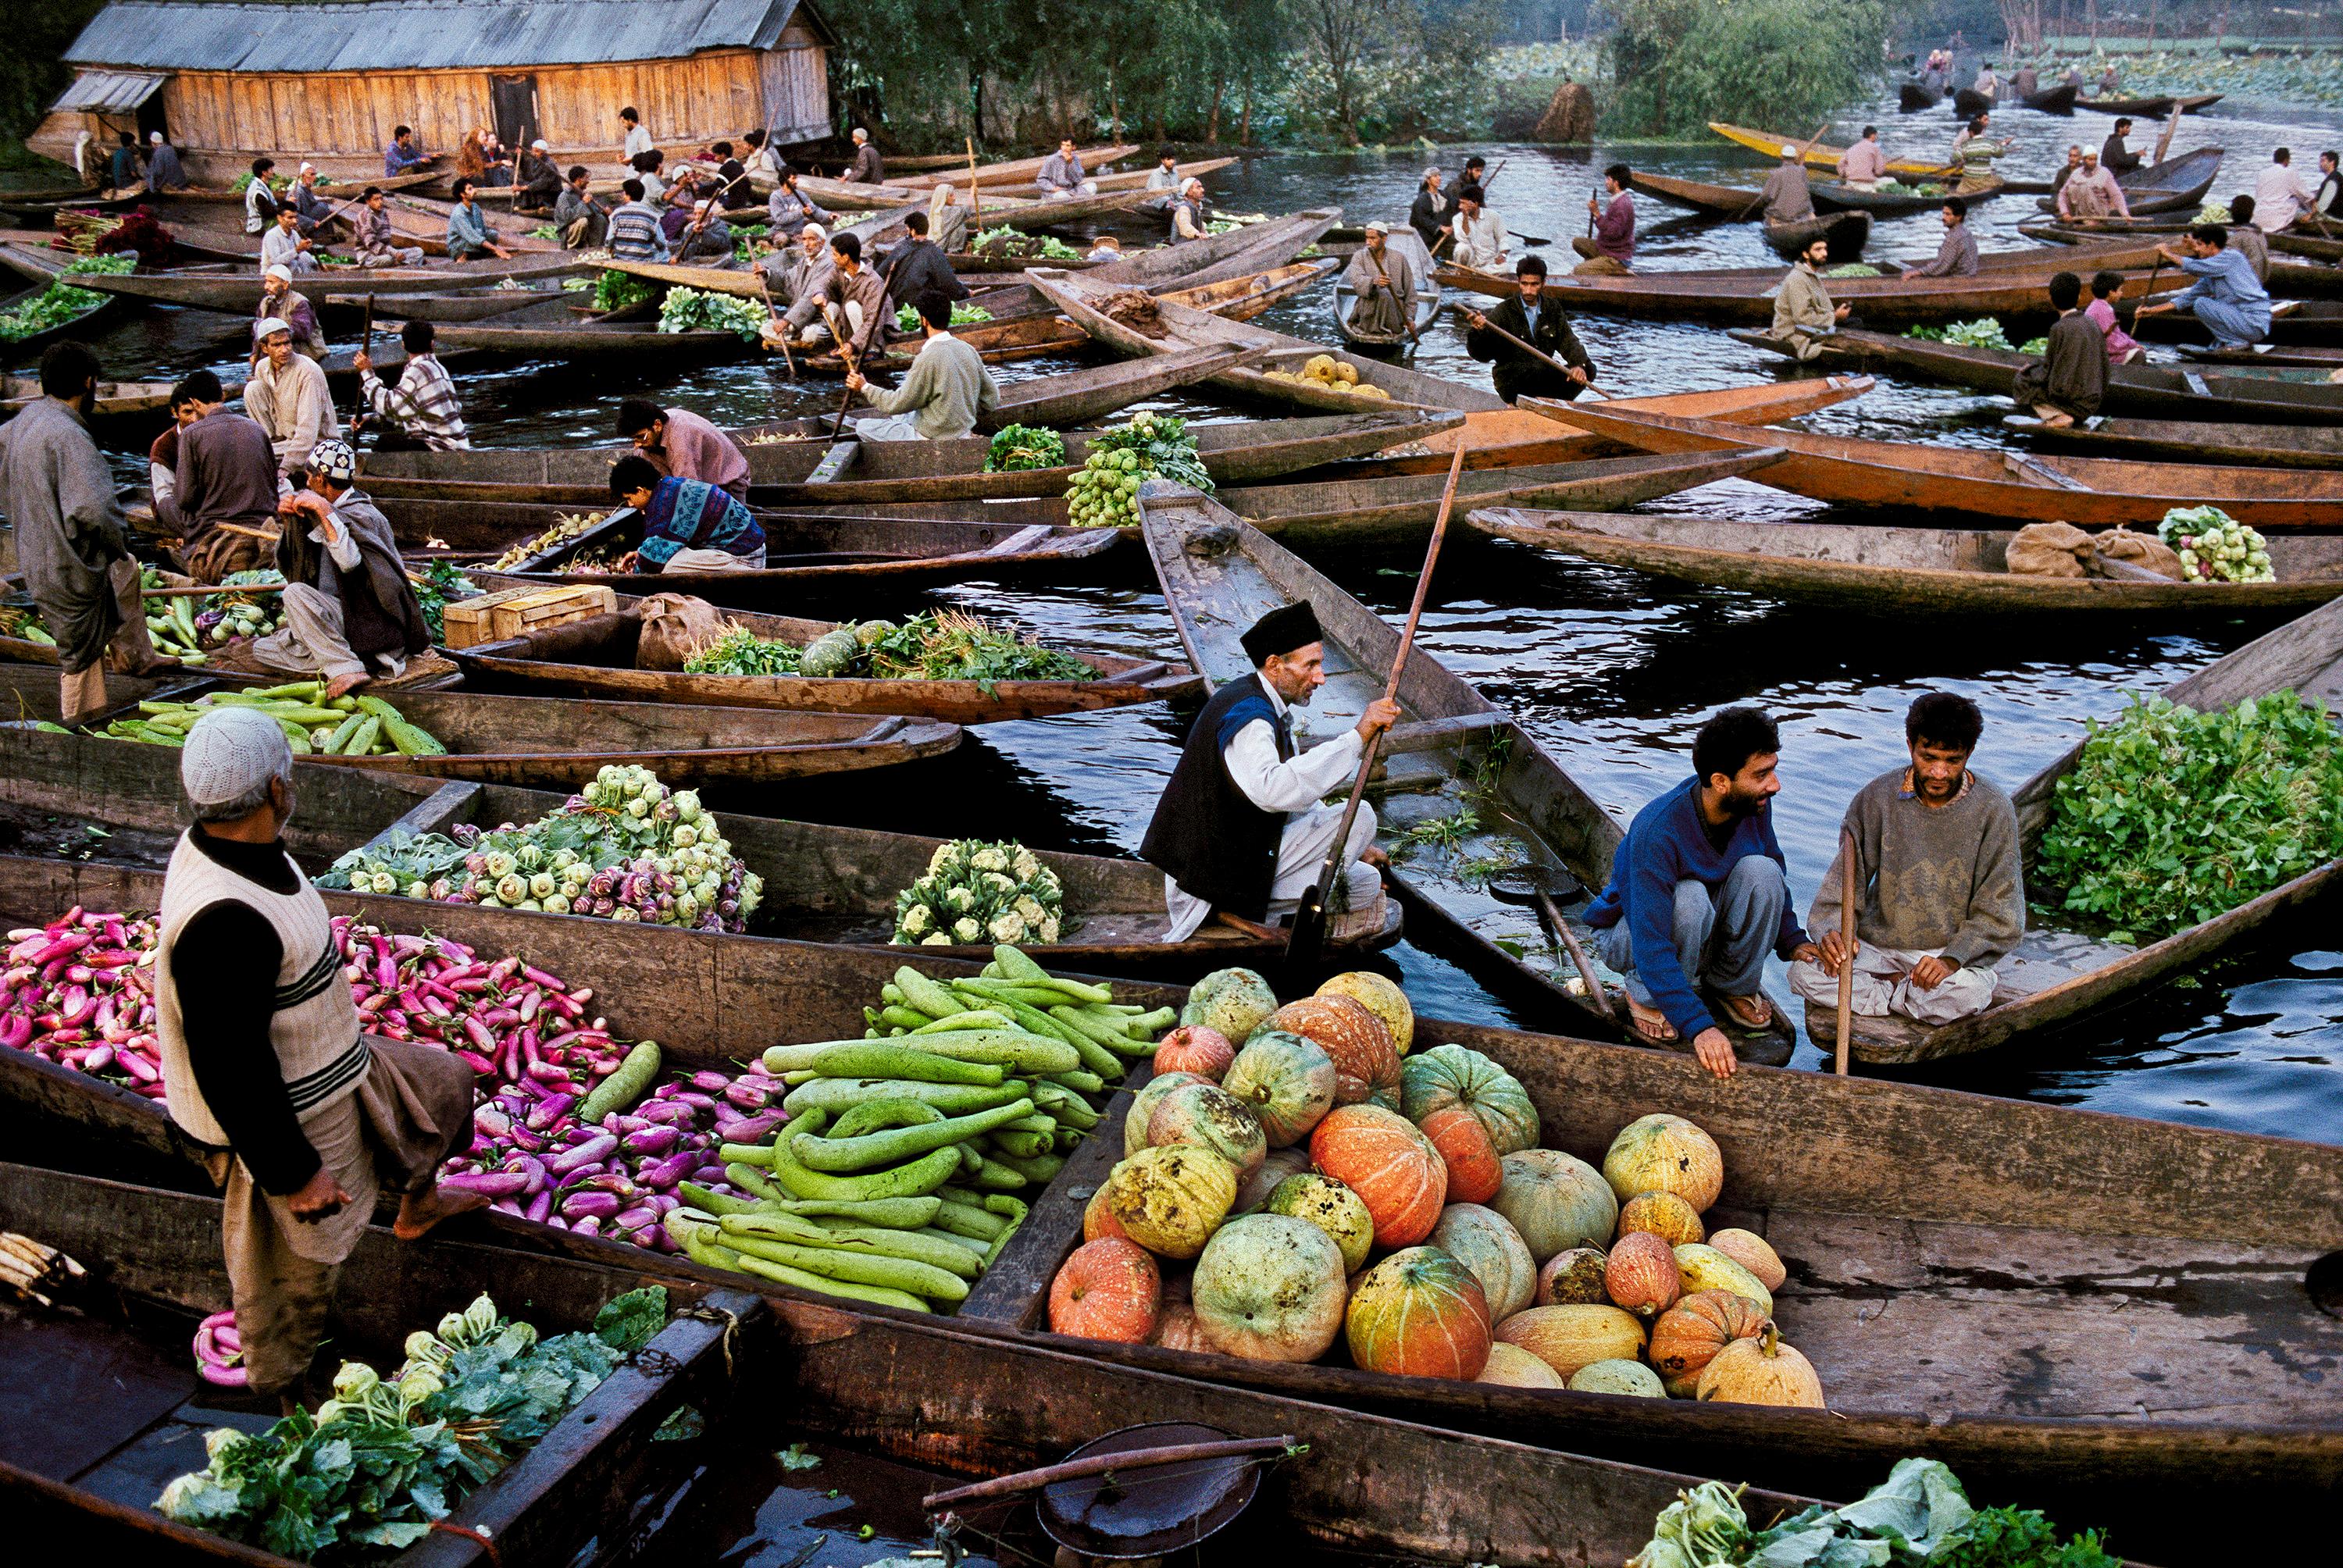 Market Vendors on Dal Lake, Kashmir, 1999 - Steve McCurry (Colour Photography)
Signed and numbered on photographer's edition label on reverse 
Digital c-type print
20 x 24 inches 
Edition of 30  

Also available in two larger sizes, please contact